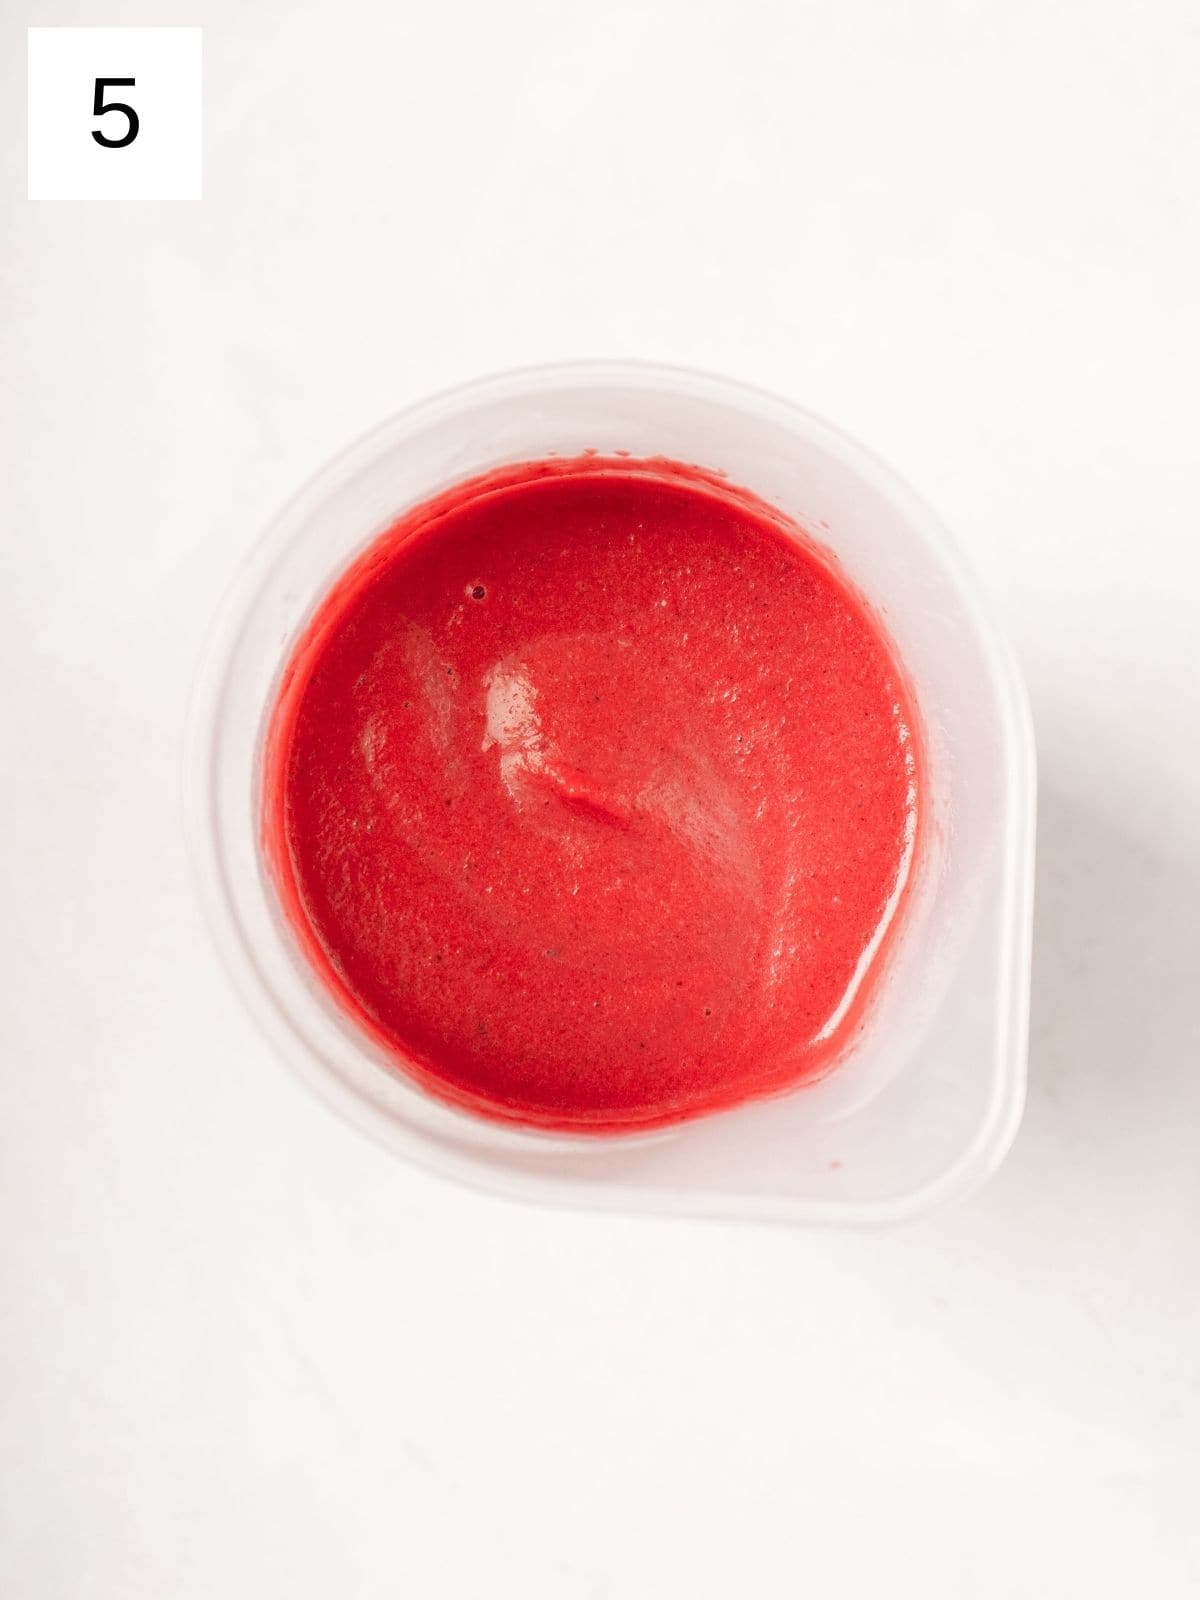 a purée mixture of beets, spices, and coconut milk in a plastic cup.